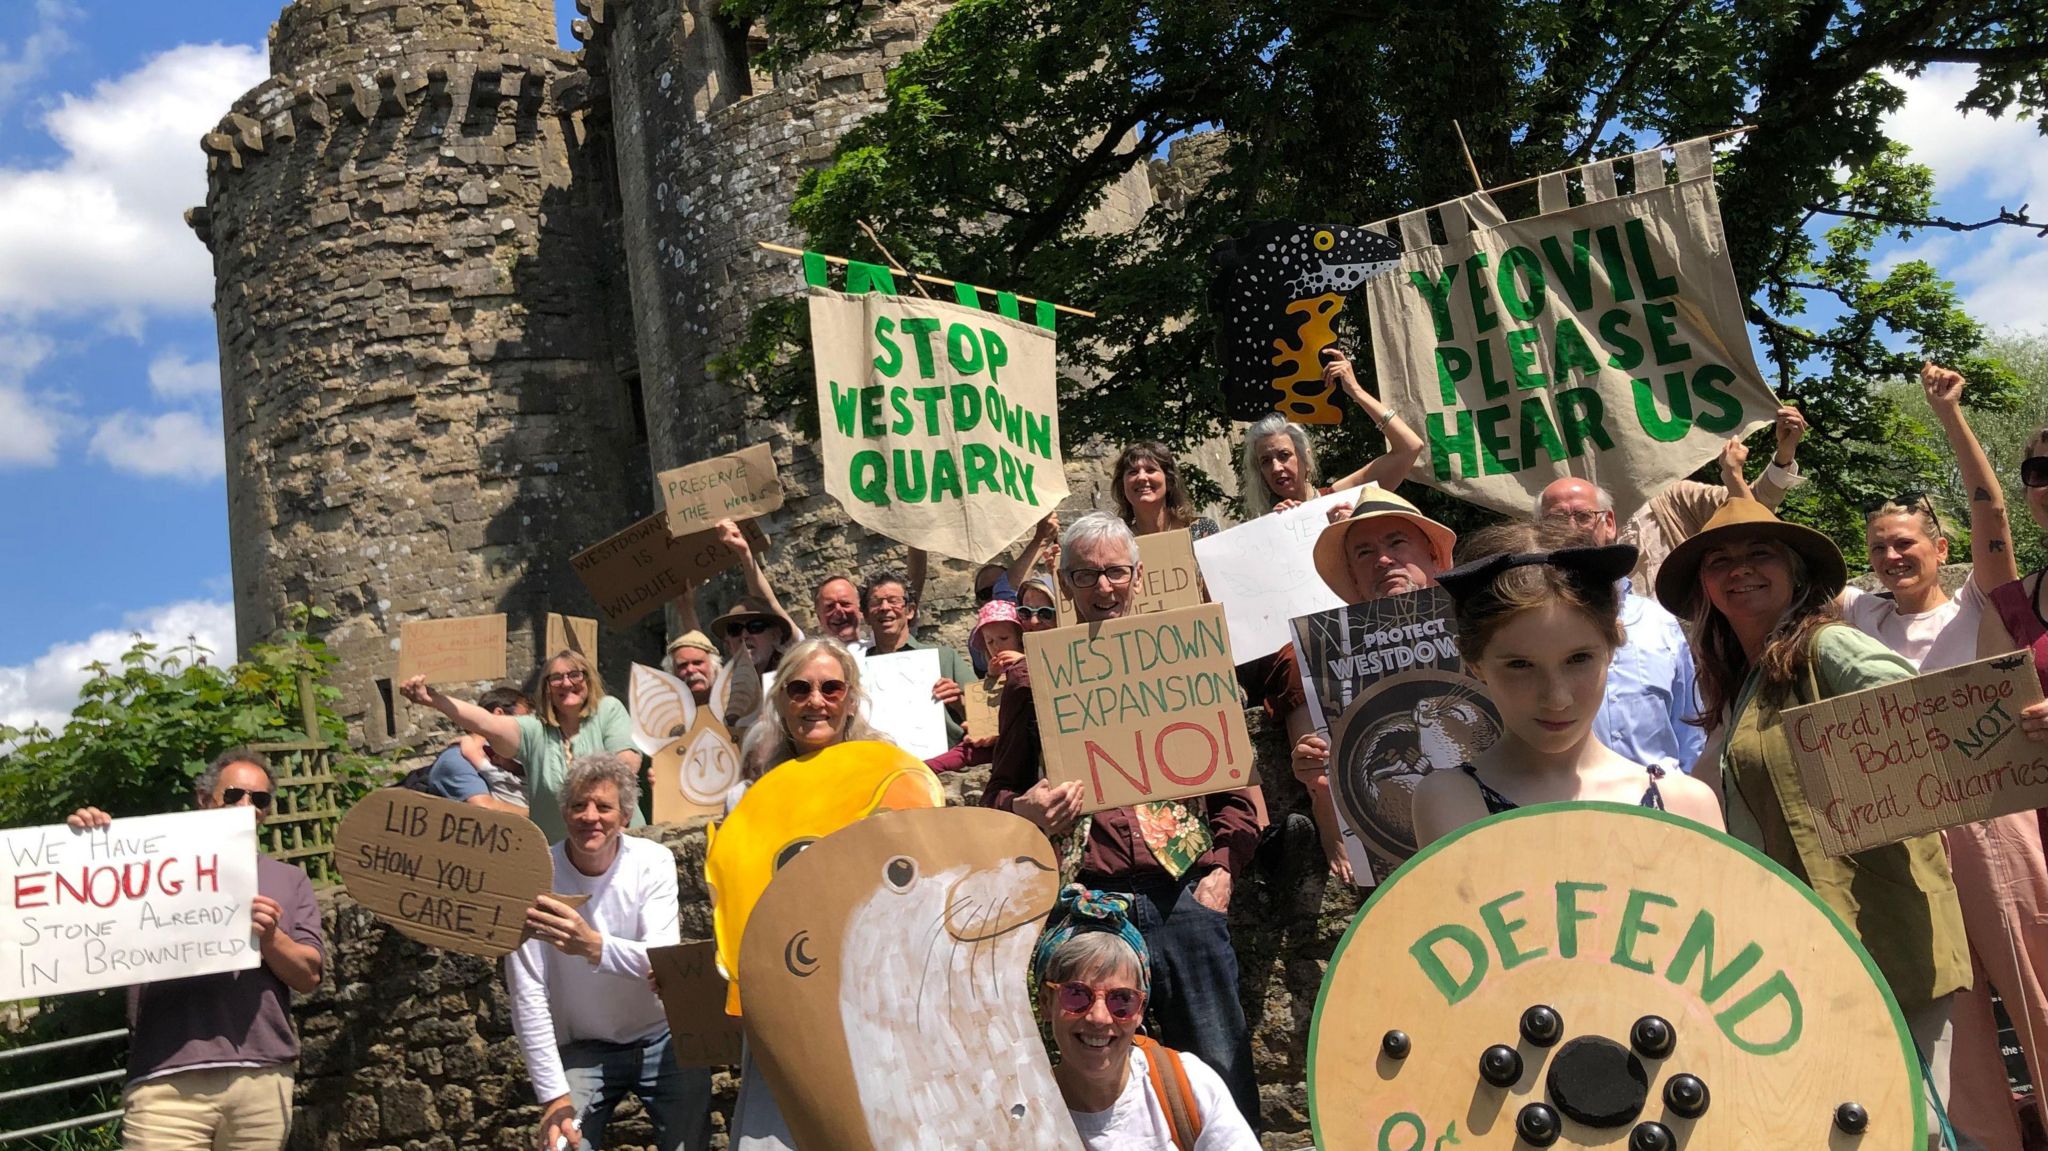 A large group of protestors standing in front of an old castle building. They are all holding cardboard signs or banners that read 'stop Westdown Quarry' and 'Westdown expansion NO!"